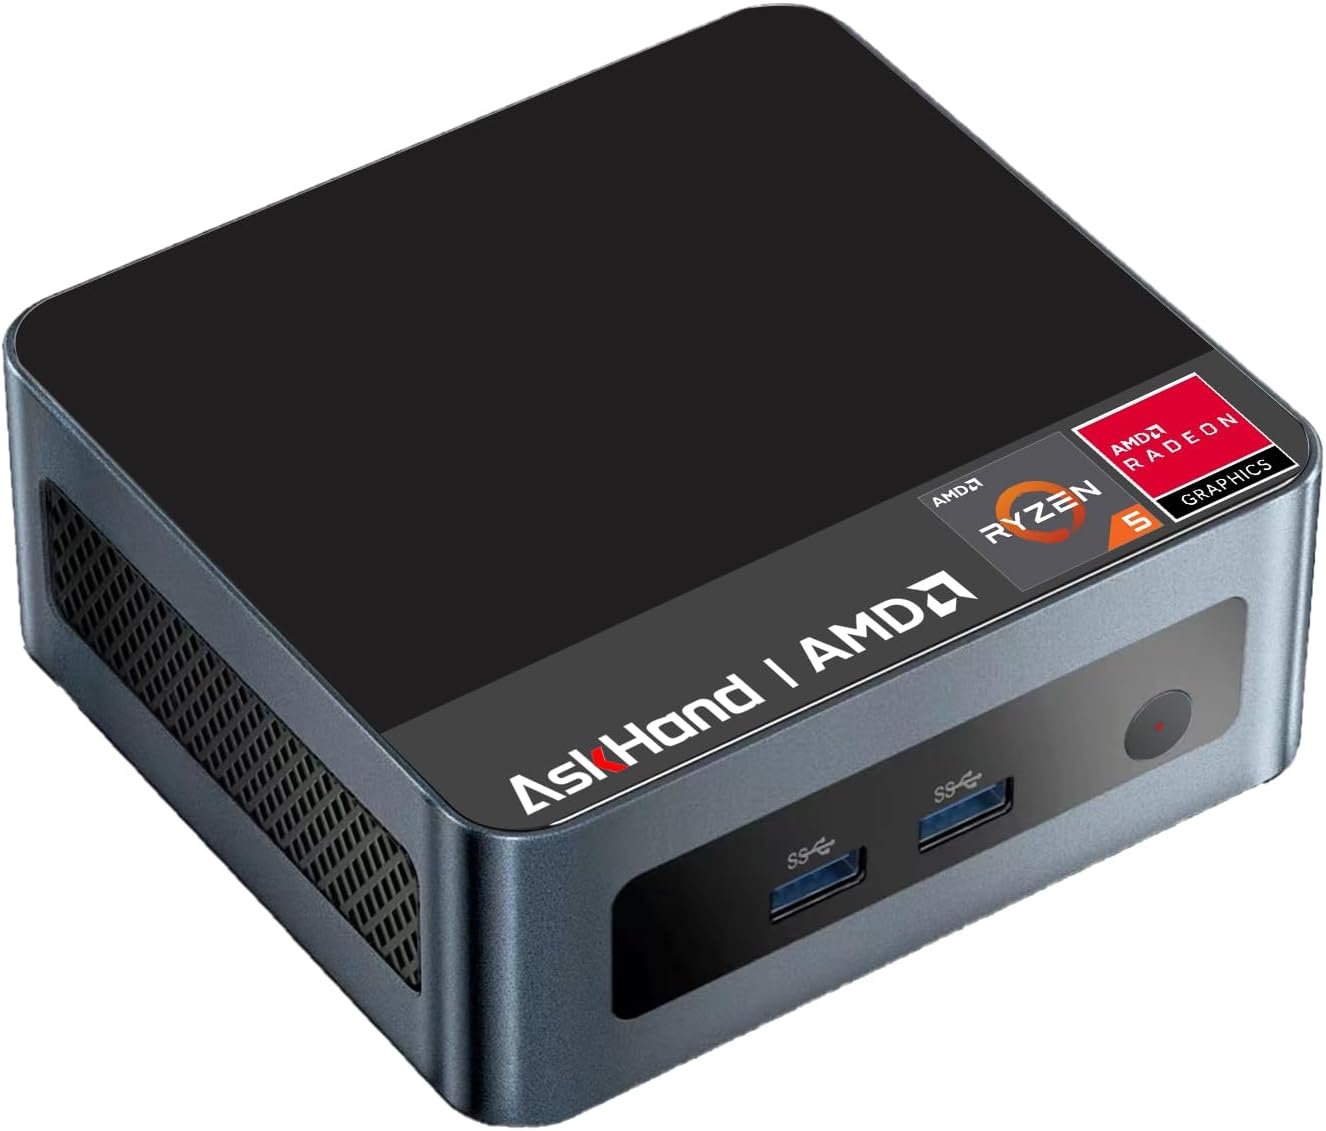 AskHand Mini PC AMD Ryzen 5 5600H 6 Core 12 Threads (3.3~4.2GHz) Windows 11 Support/WiFi 6E /BT-5.2/Typc 3.0 and 2*HDMI 4K@60Hz 3 Screens simultaneous Output, Home/Office/Game PC (R5 5600H 16GB)